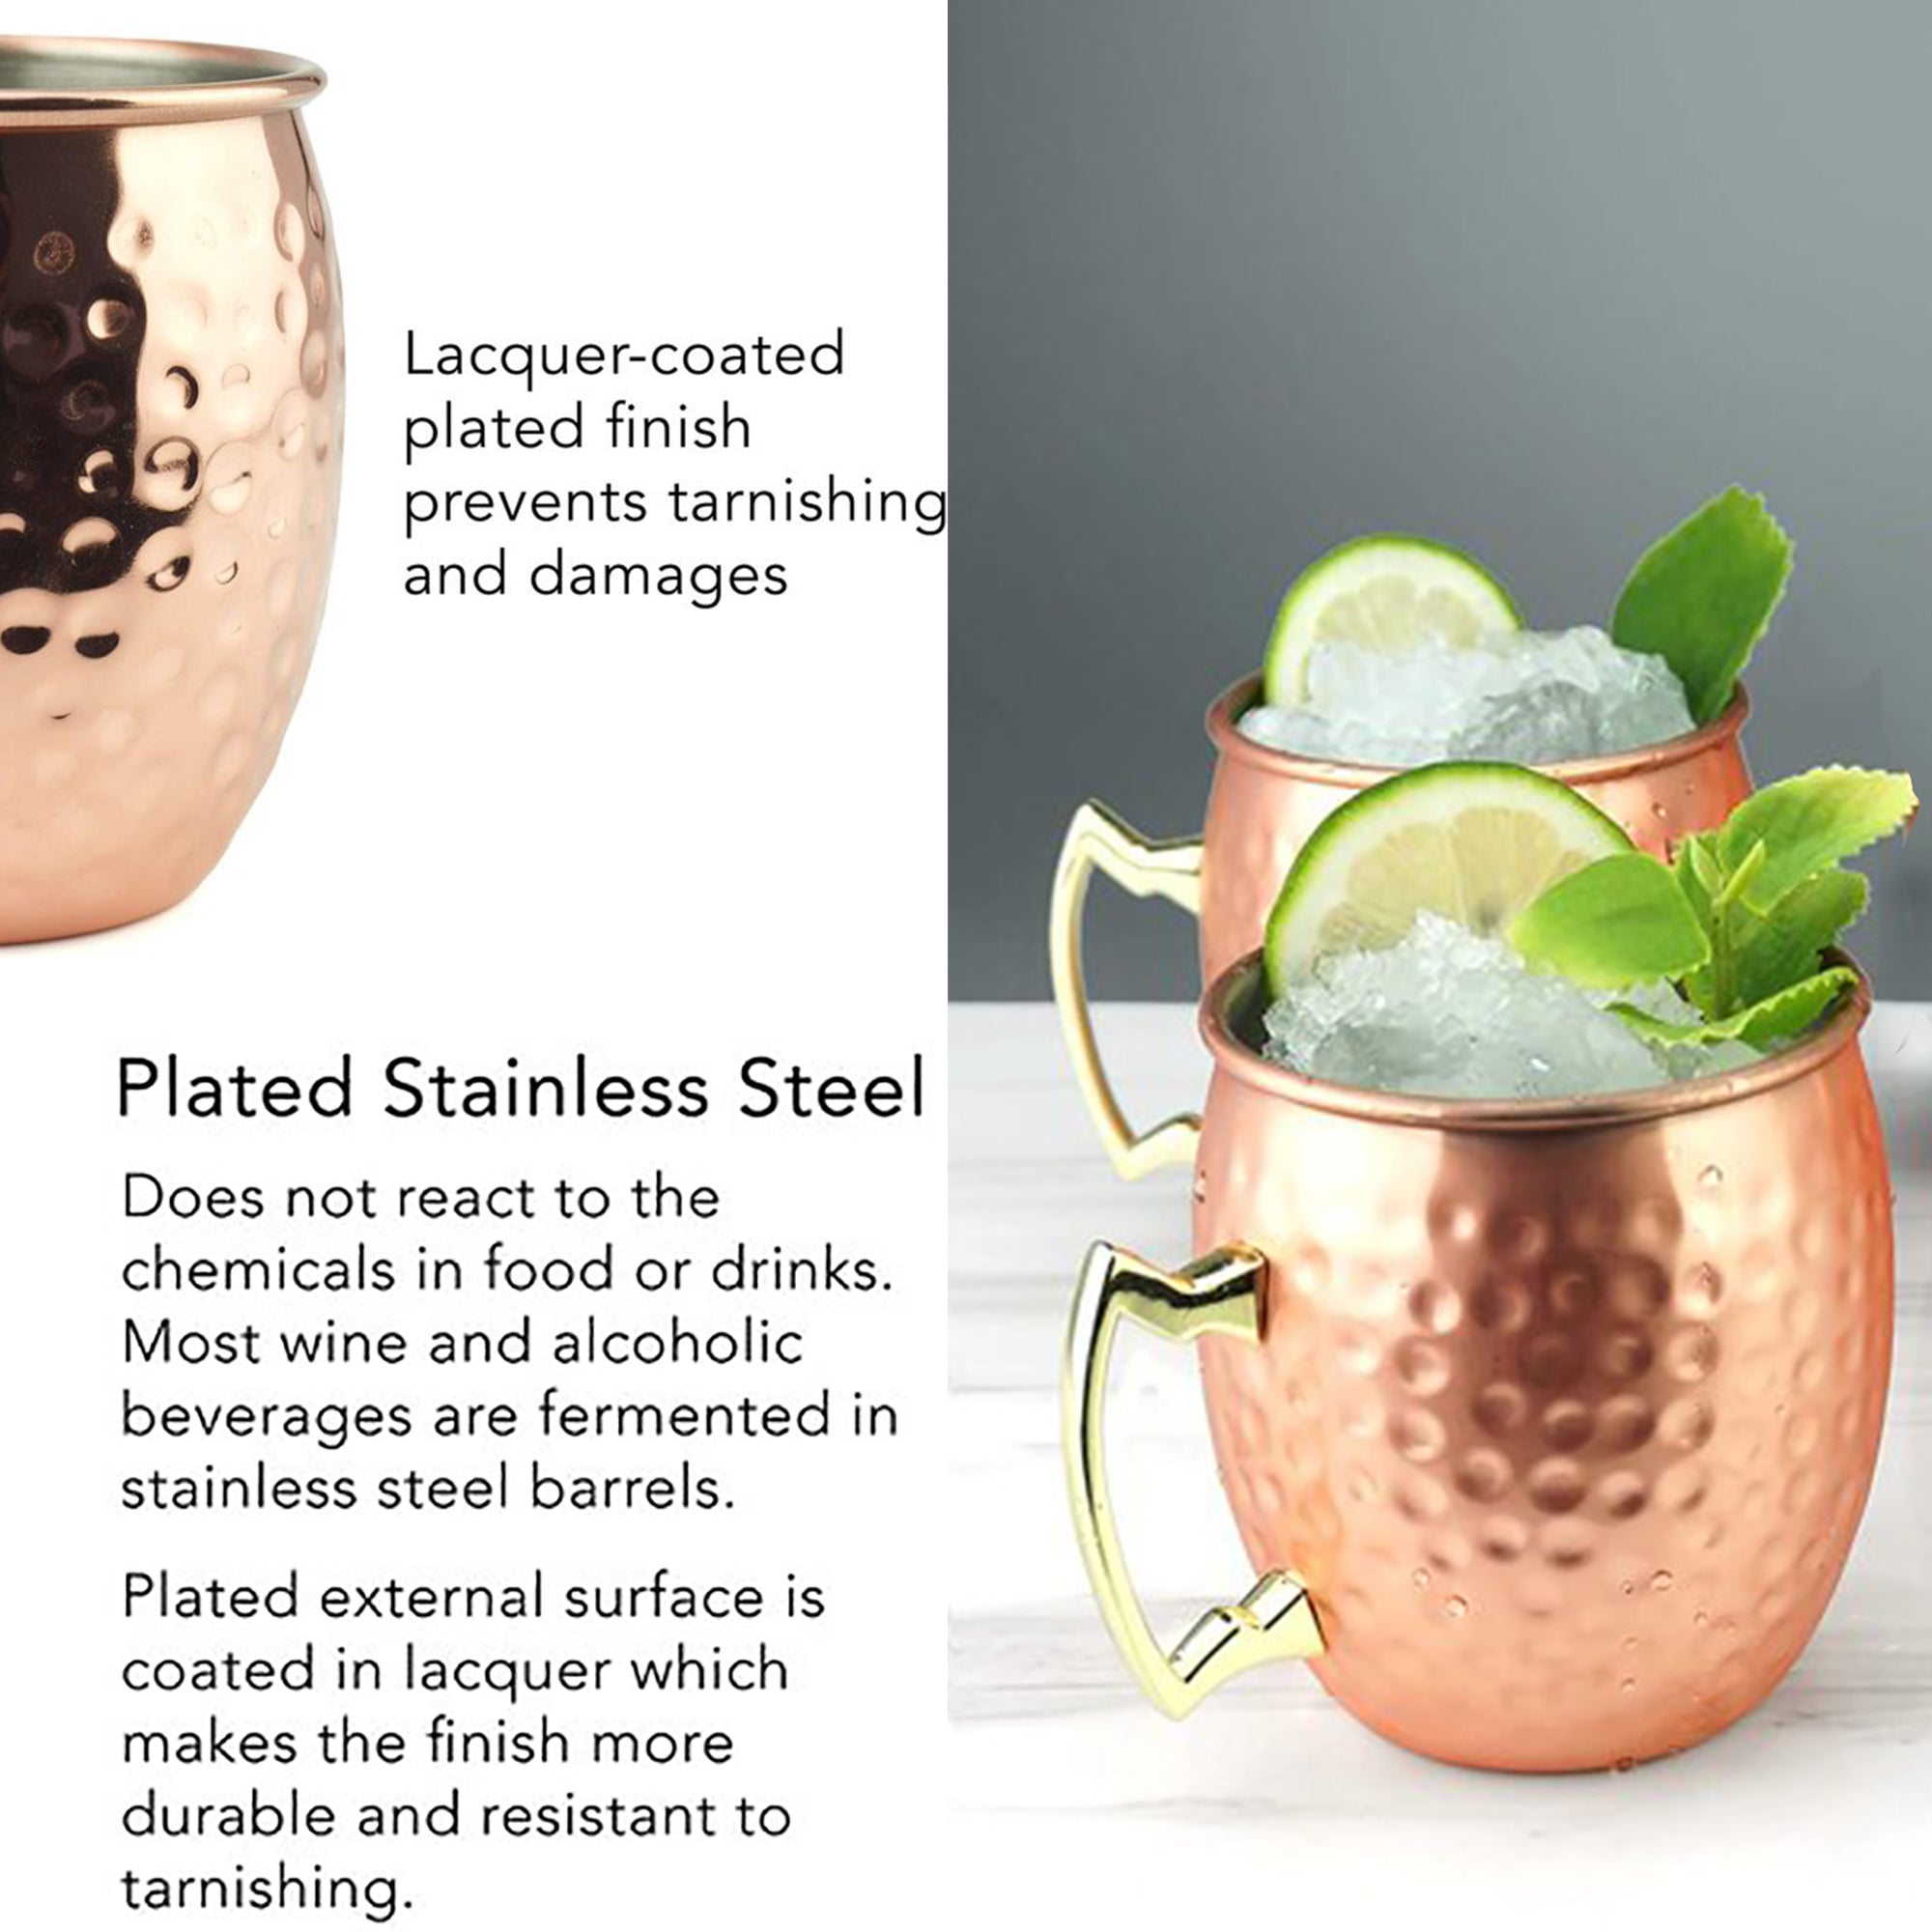 LMA Hammered Stainless Steel Moscow Mule Mug Set - 500ml - 2-Piece